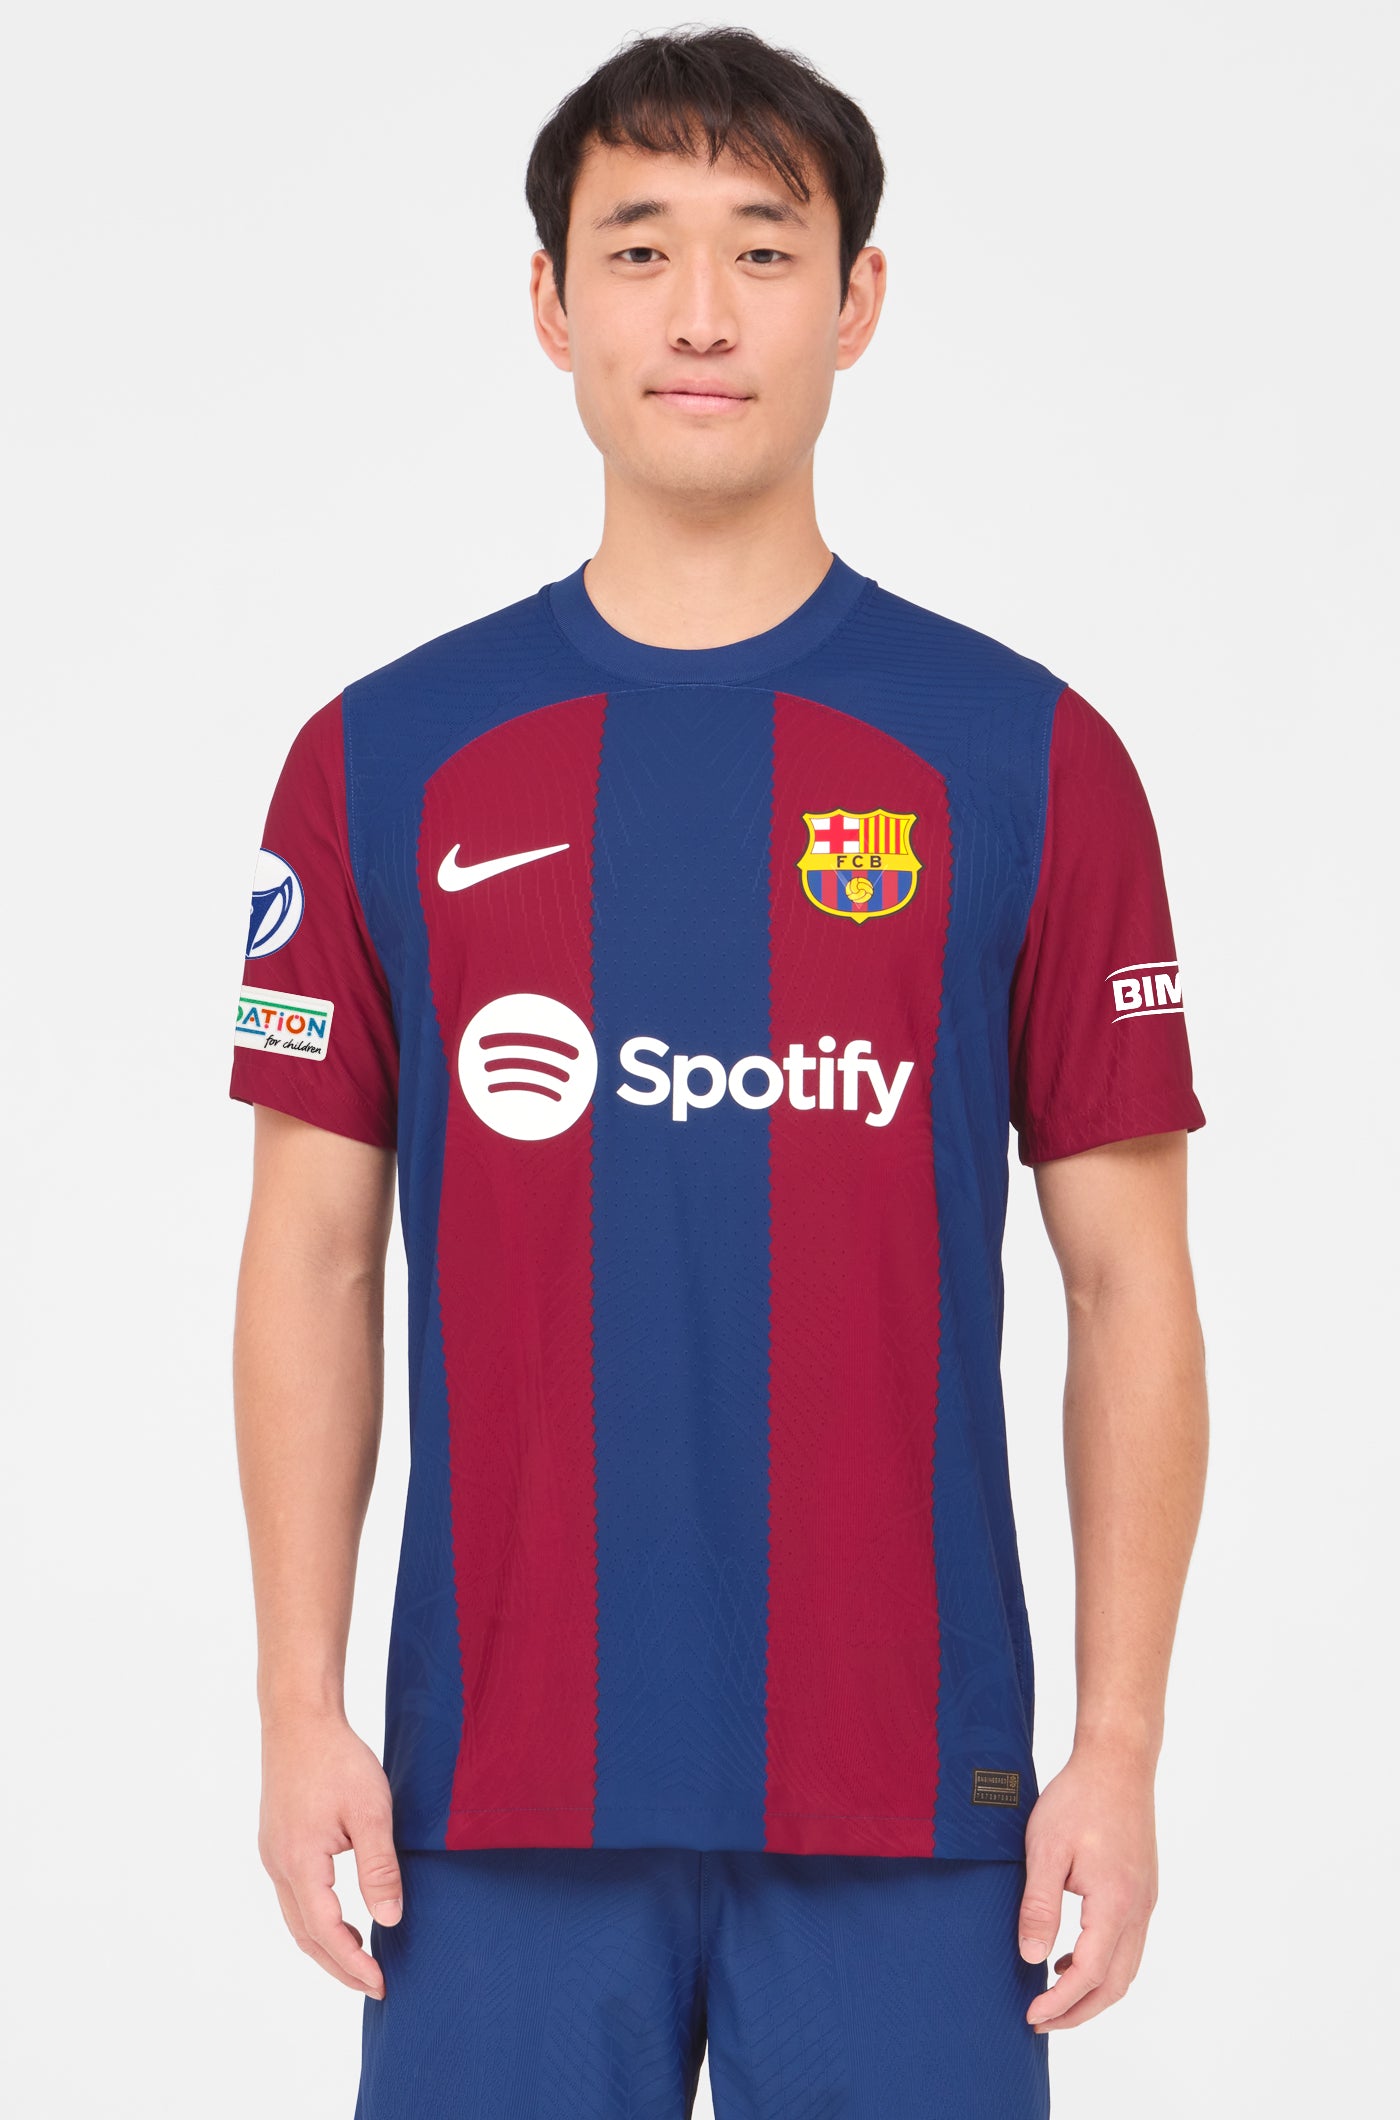 UWCL FC Barcelona home shirt 23/24 Player's Edition  - BRUGTS